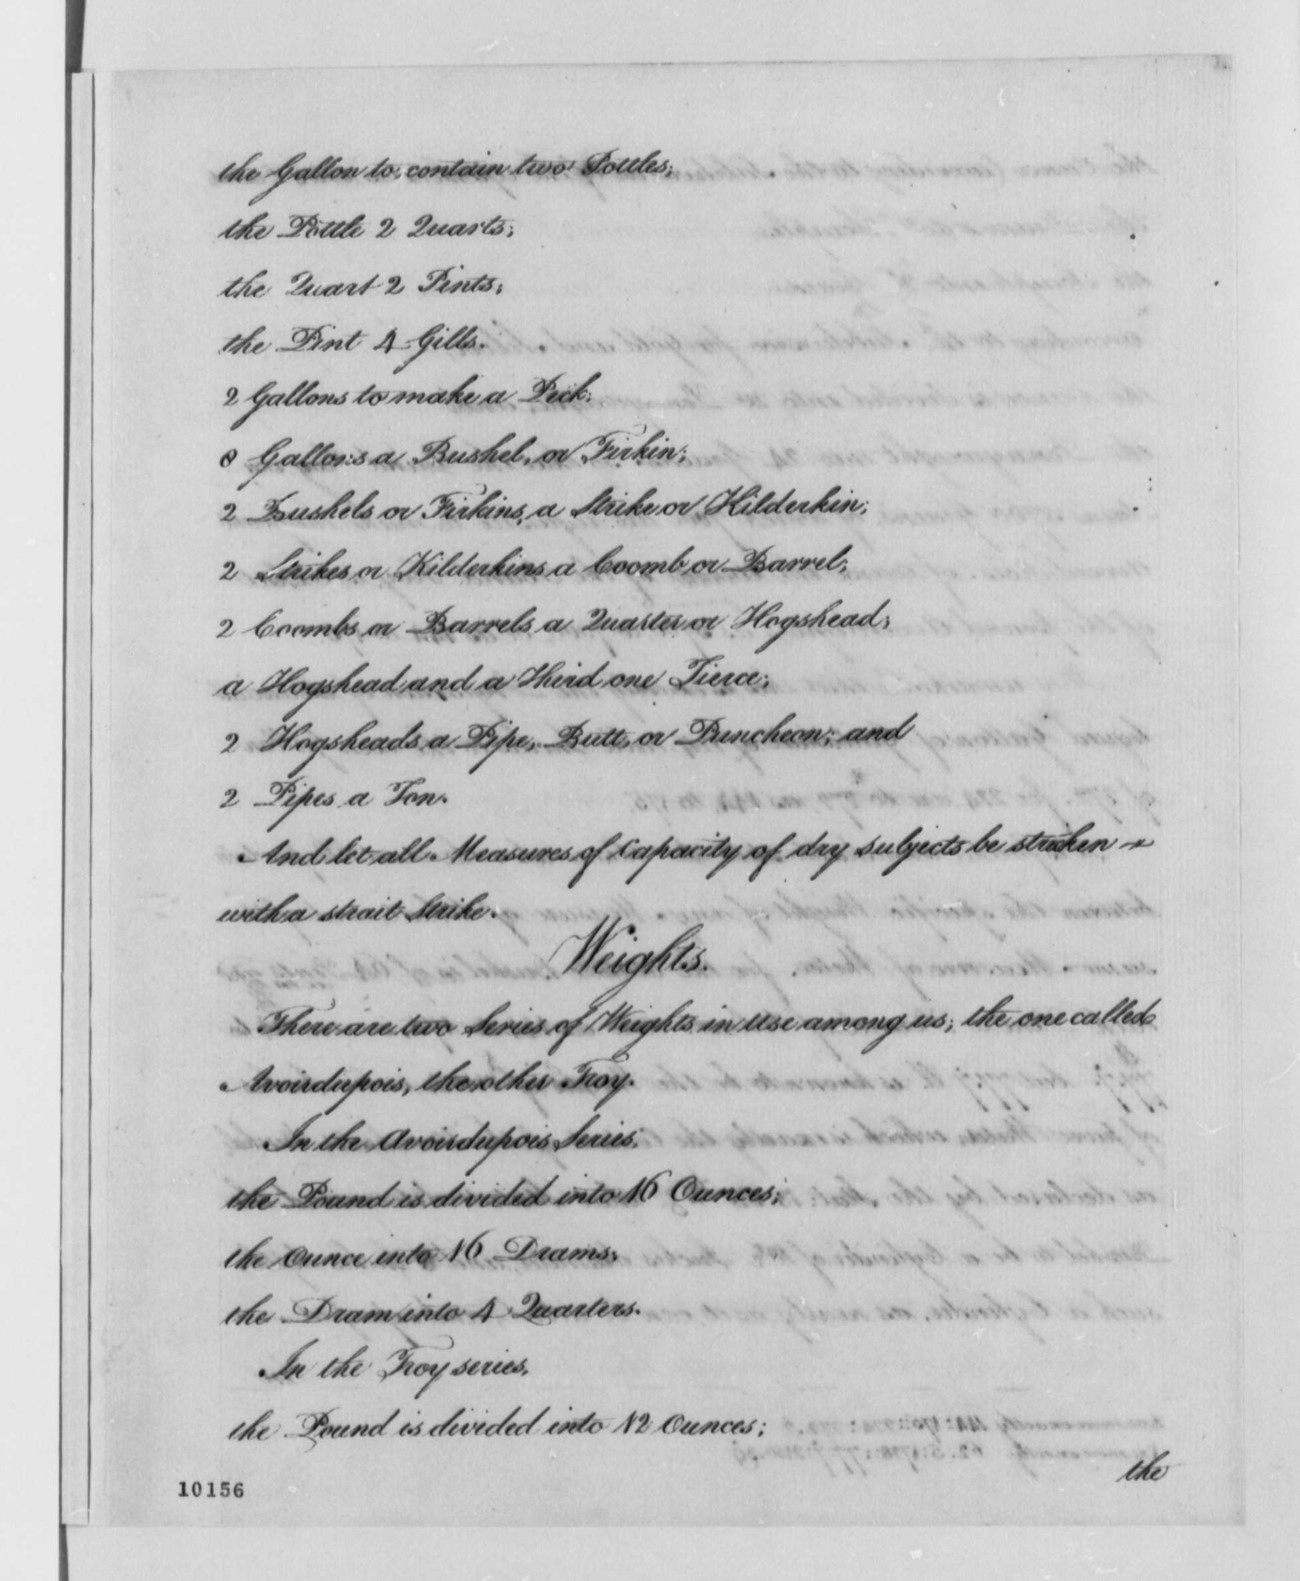 Thomas Jefferson to House of Representatives, July 4, 1790, Report on Plan for Establishing a Uniform Currency, with Draft Copy